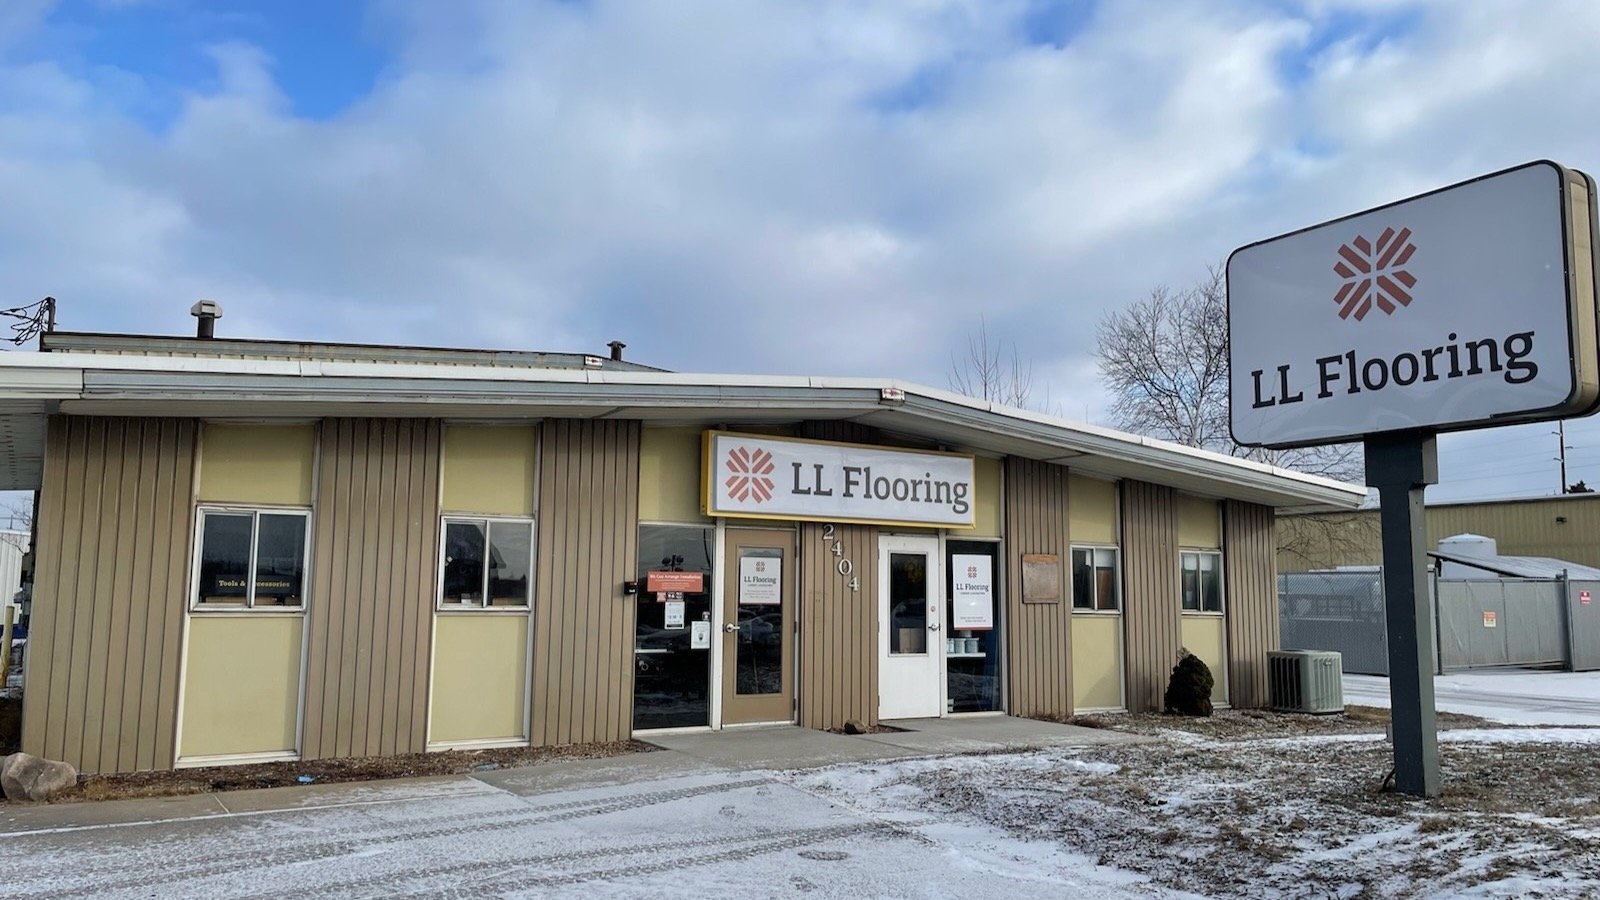 LL Flooring #1128 Traverse City | 2404 S. Airport Road | Storefront